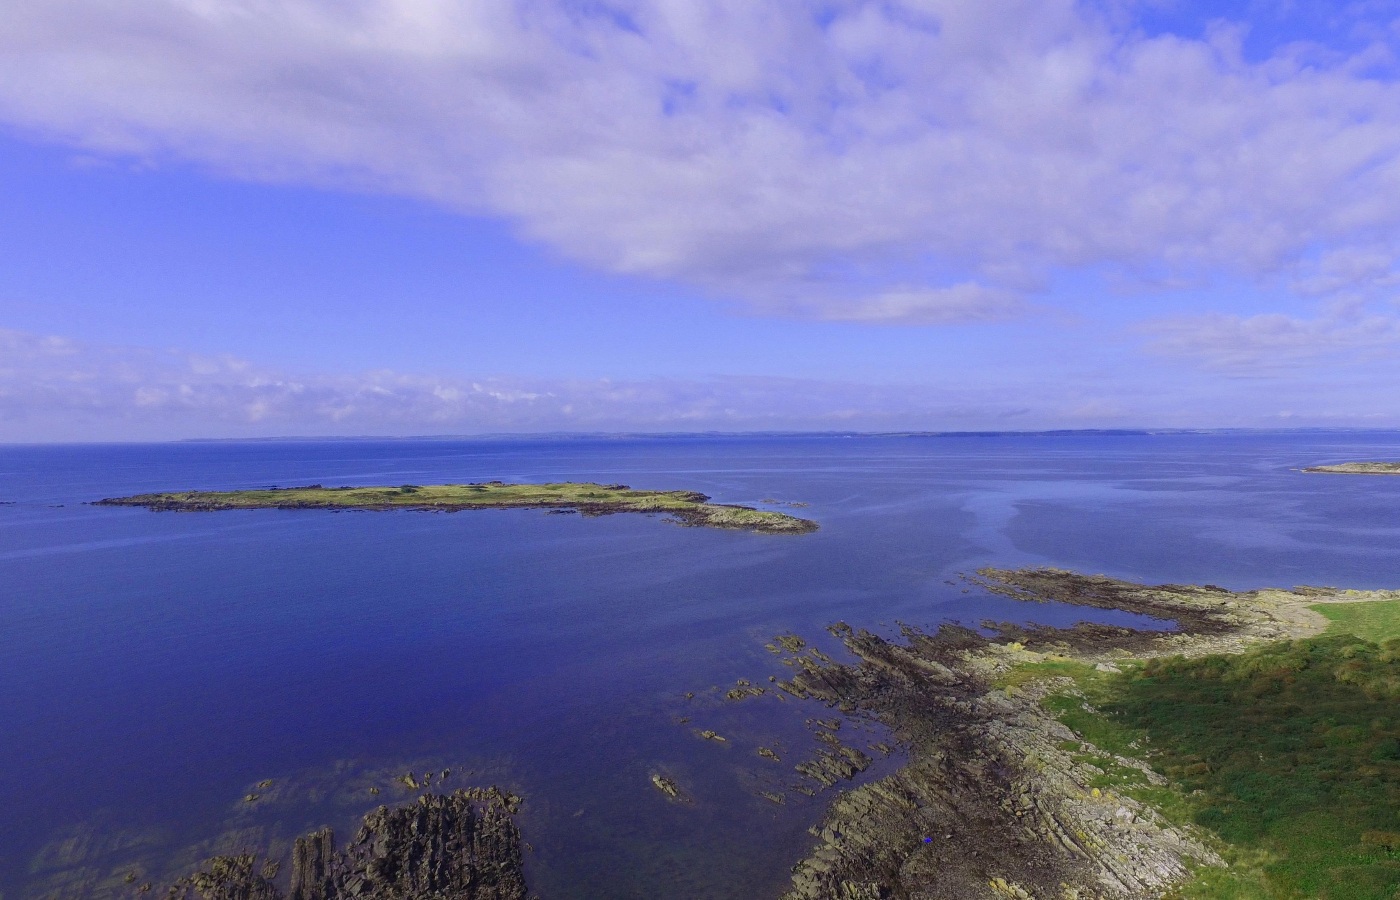 The 25-acre island has 'outstanding views' and is said to be rich in birdlife and wildlife.